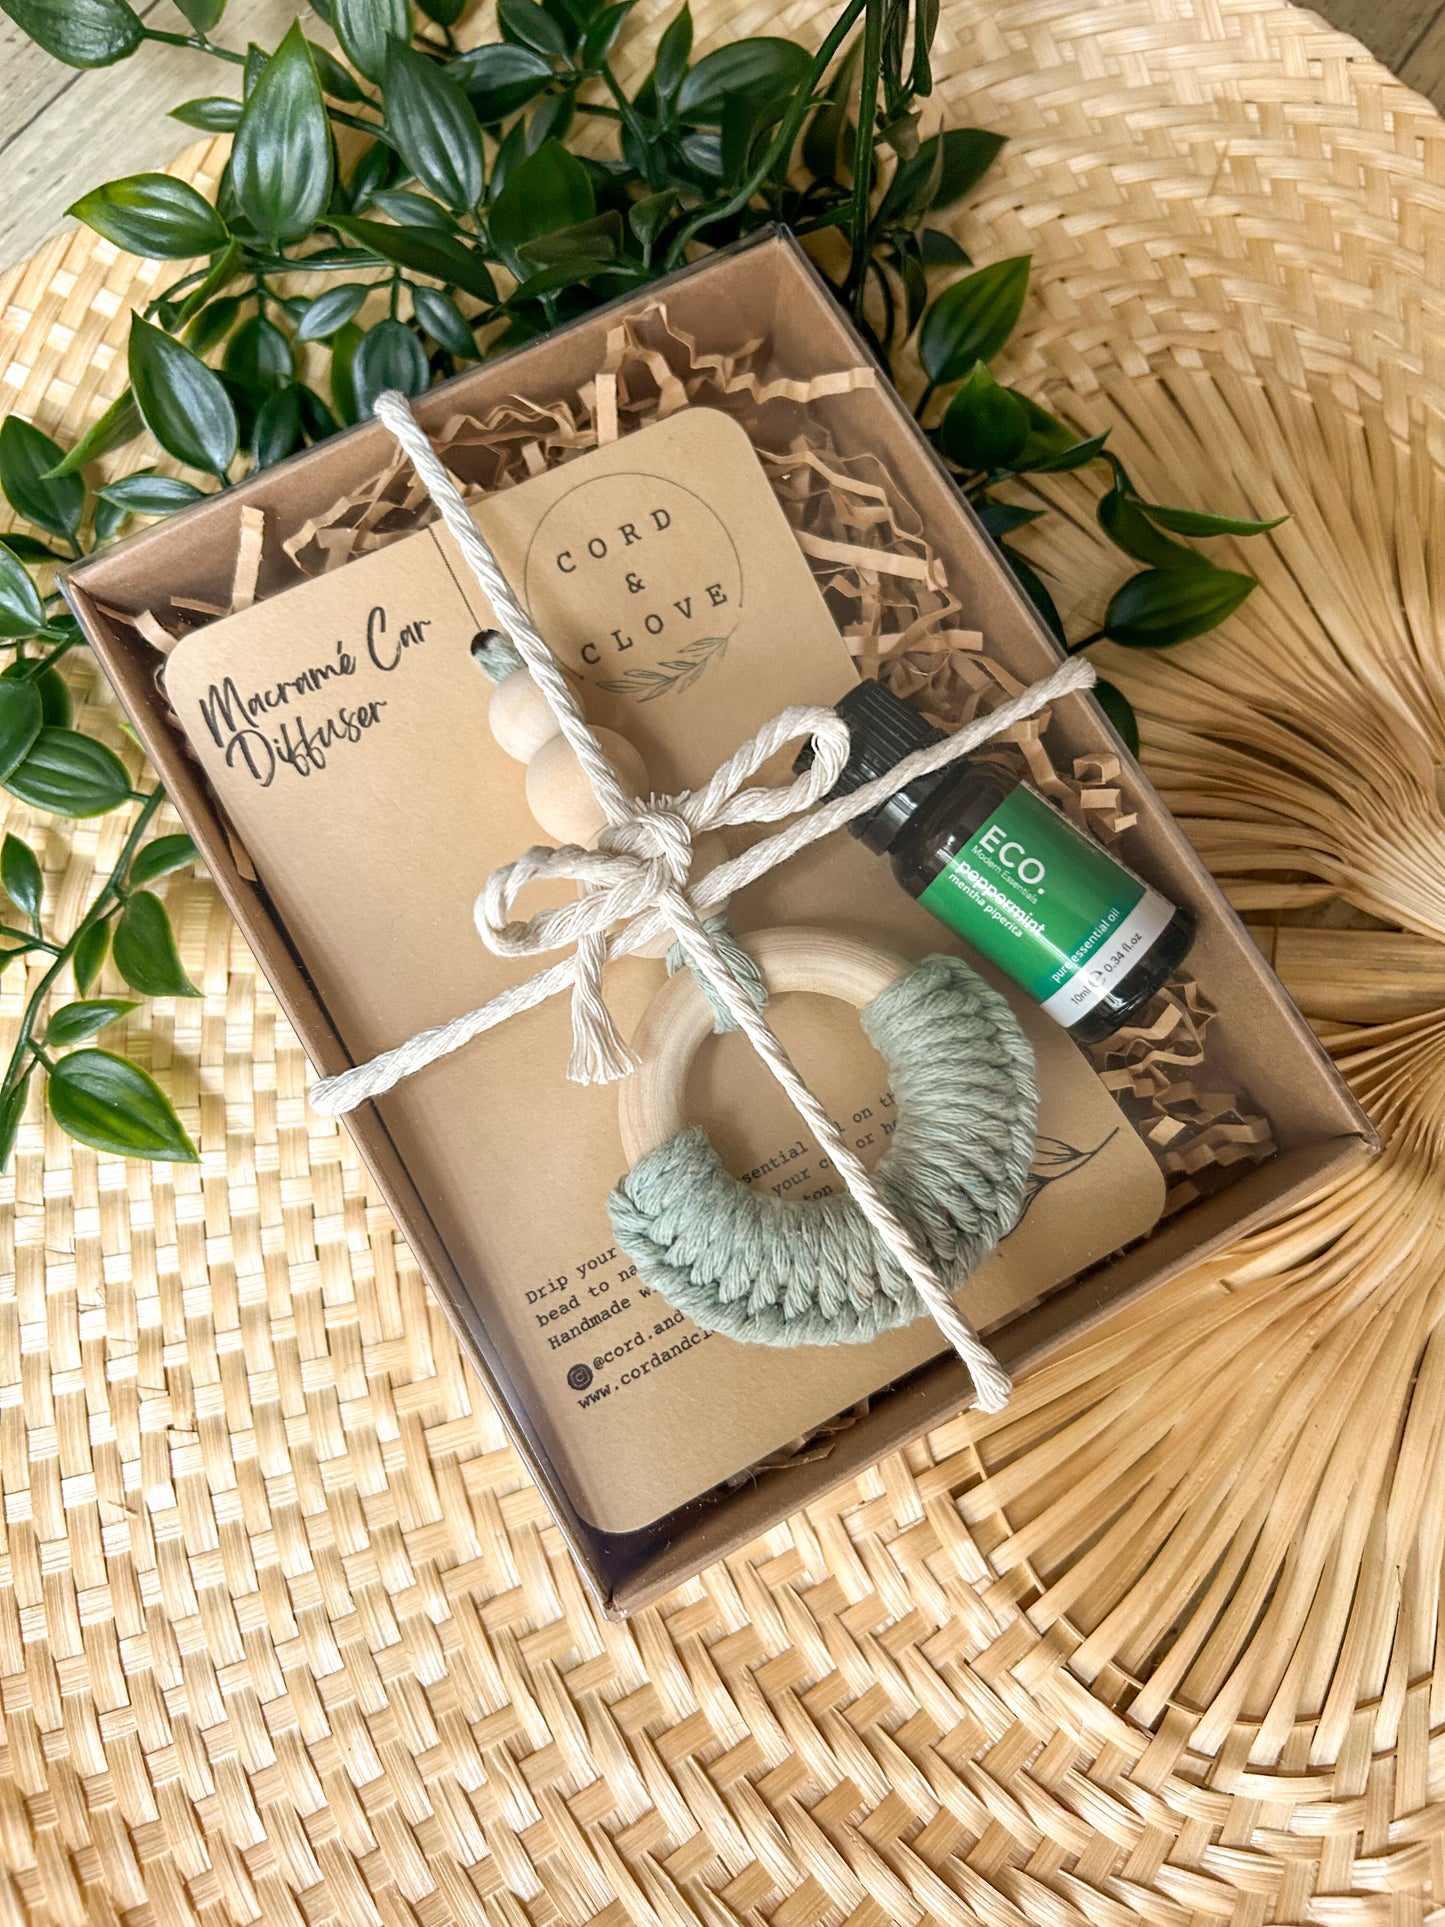 NEW! Essential Oil Diffuser Gift Set - Peppermint